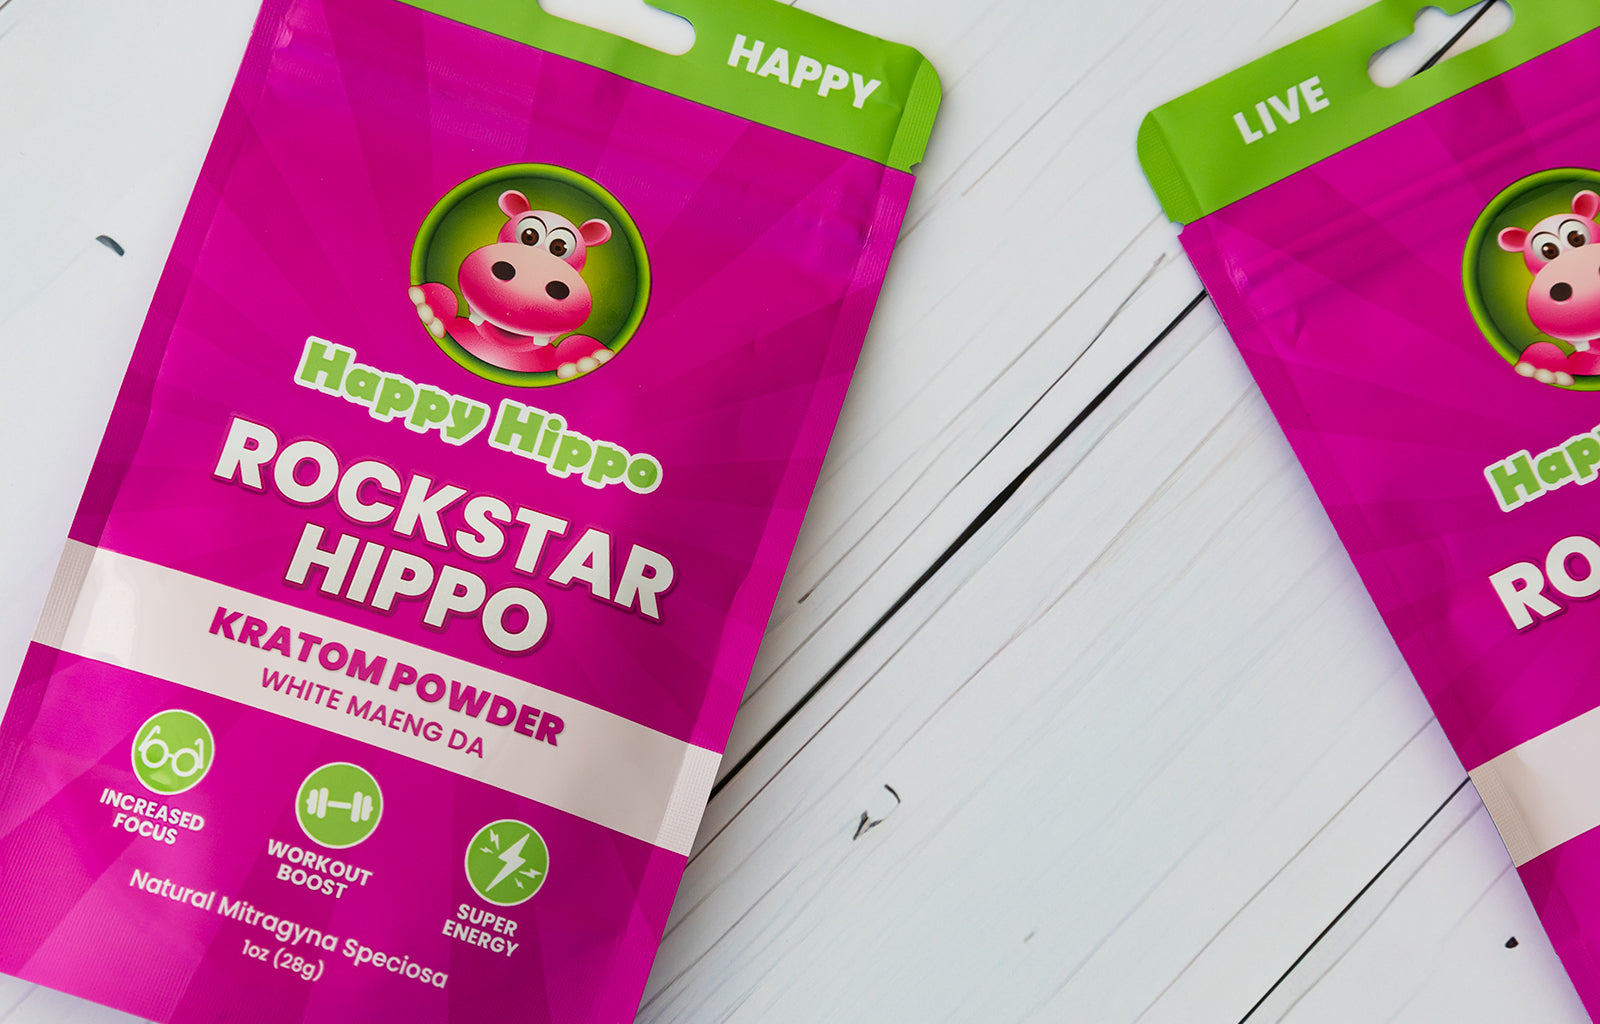 Featured image depicting two Happy Hippo branded packets of White Maeng Da (Rockstar Hippo) Kratom Powder.